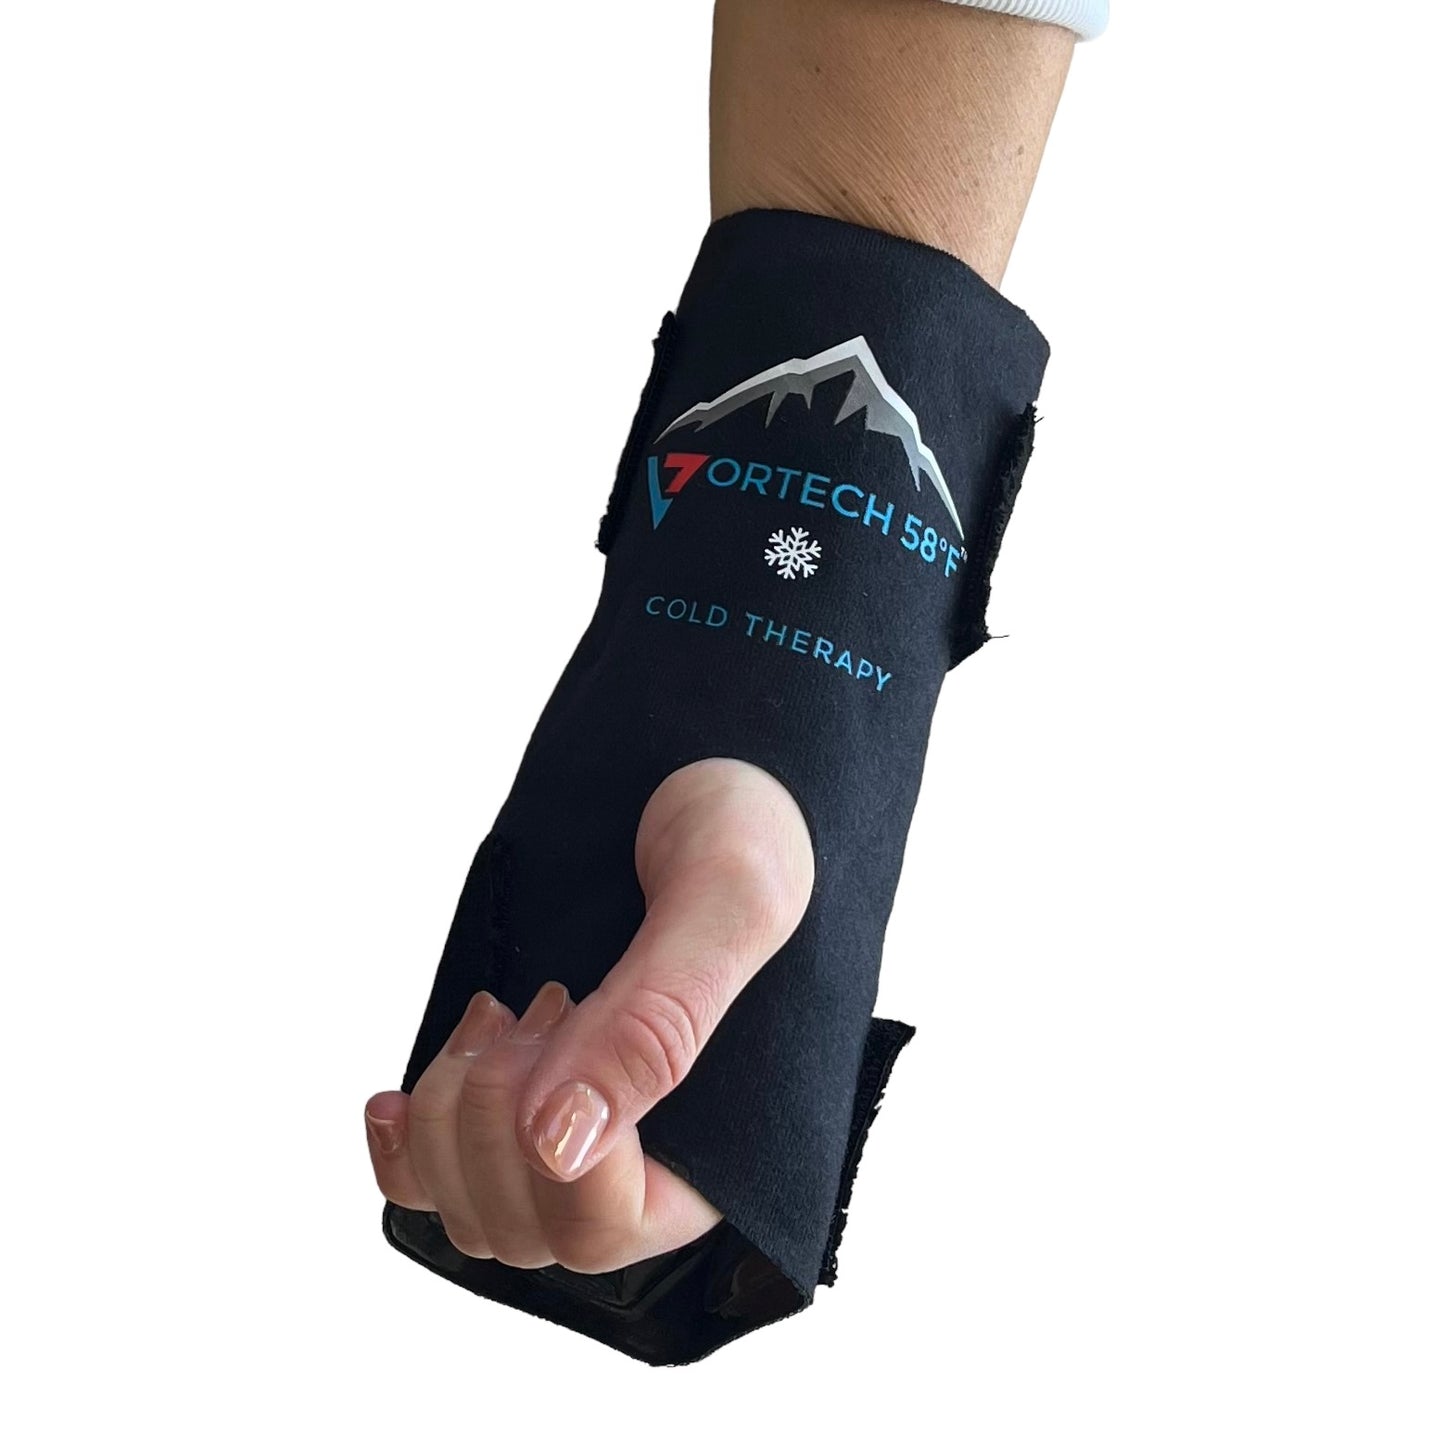 Vortech 58 - Wrist Wrap - Cold Therapy Product